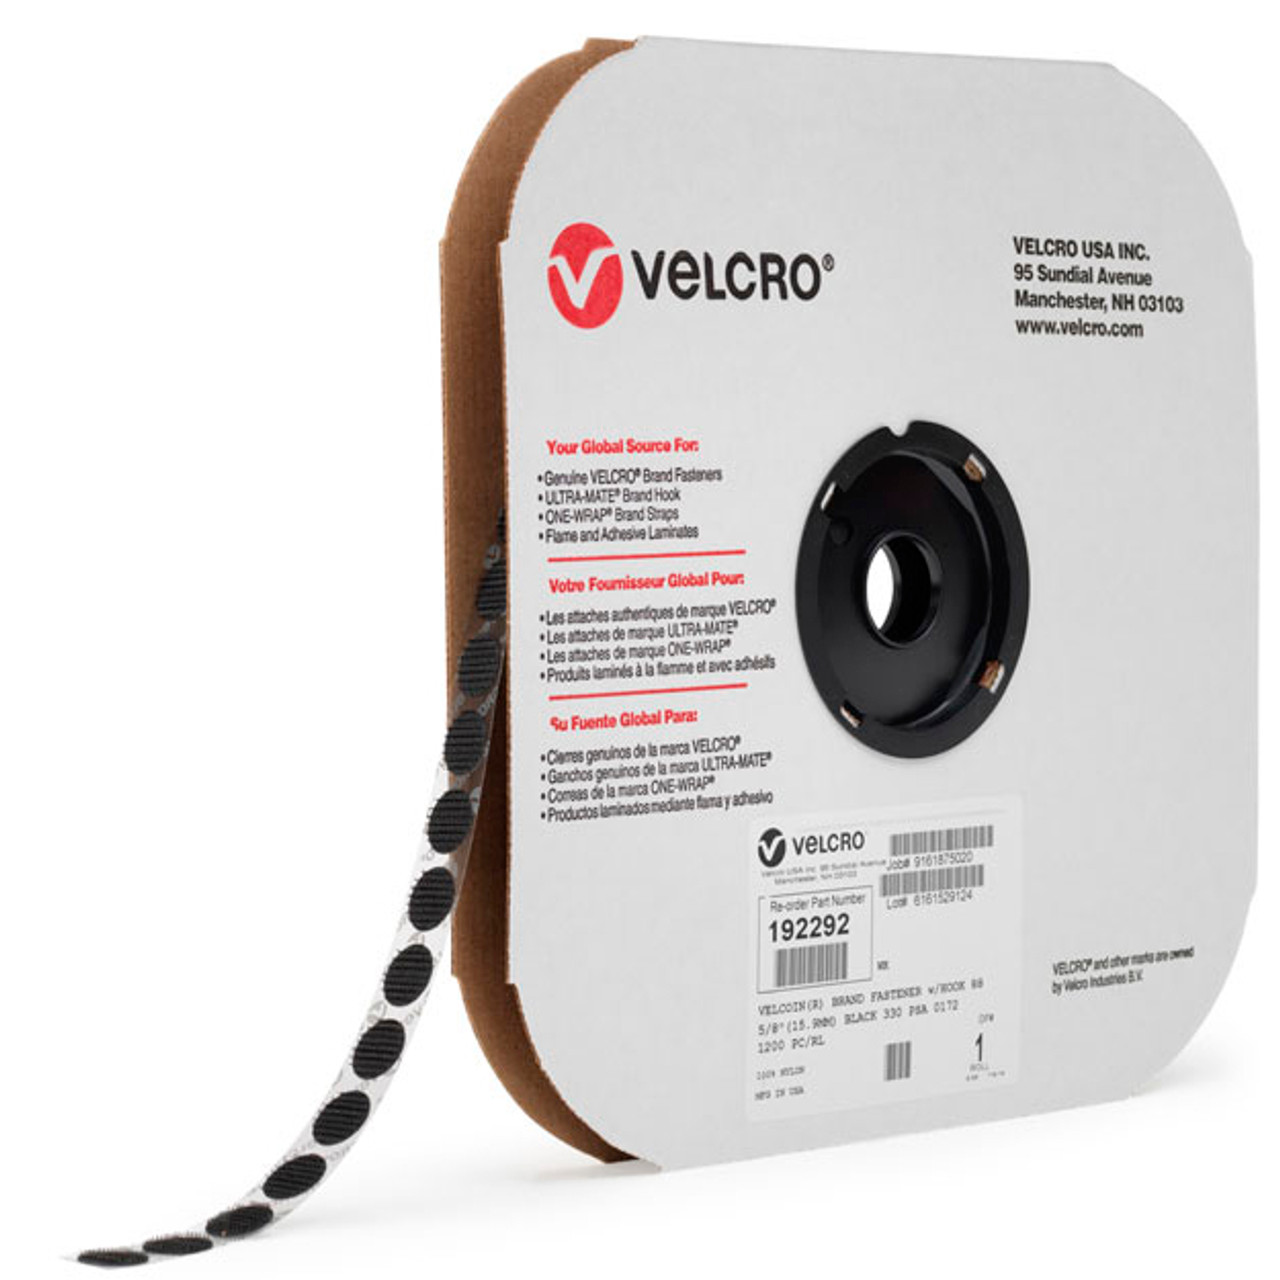 VELCRO® Brand Hook 88 and Loop 1000 with 0172 PSA